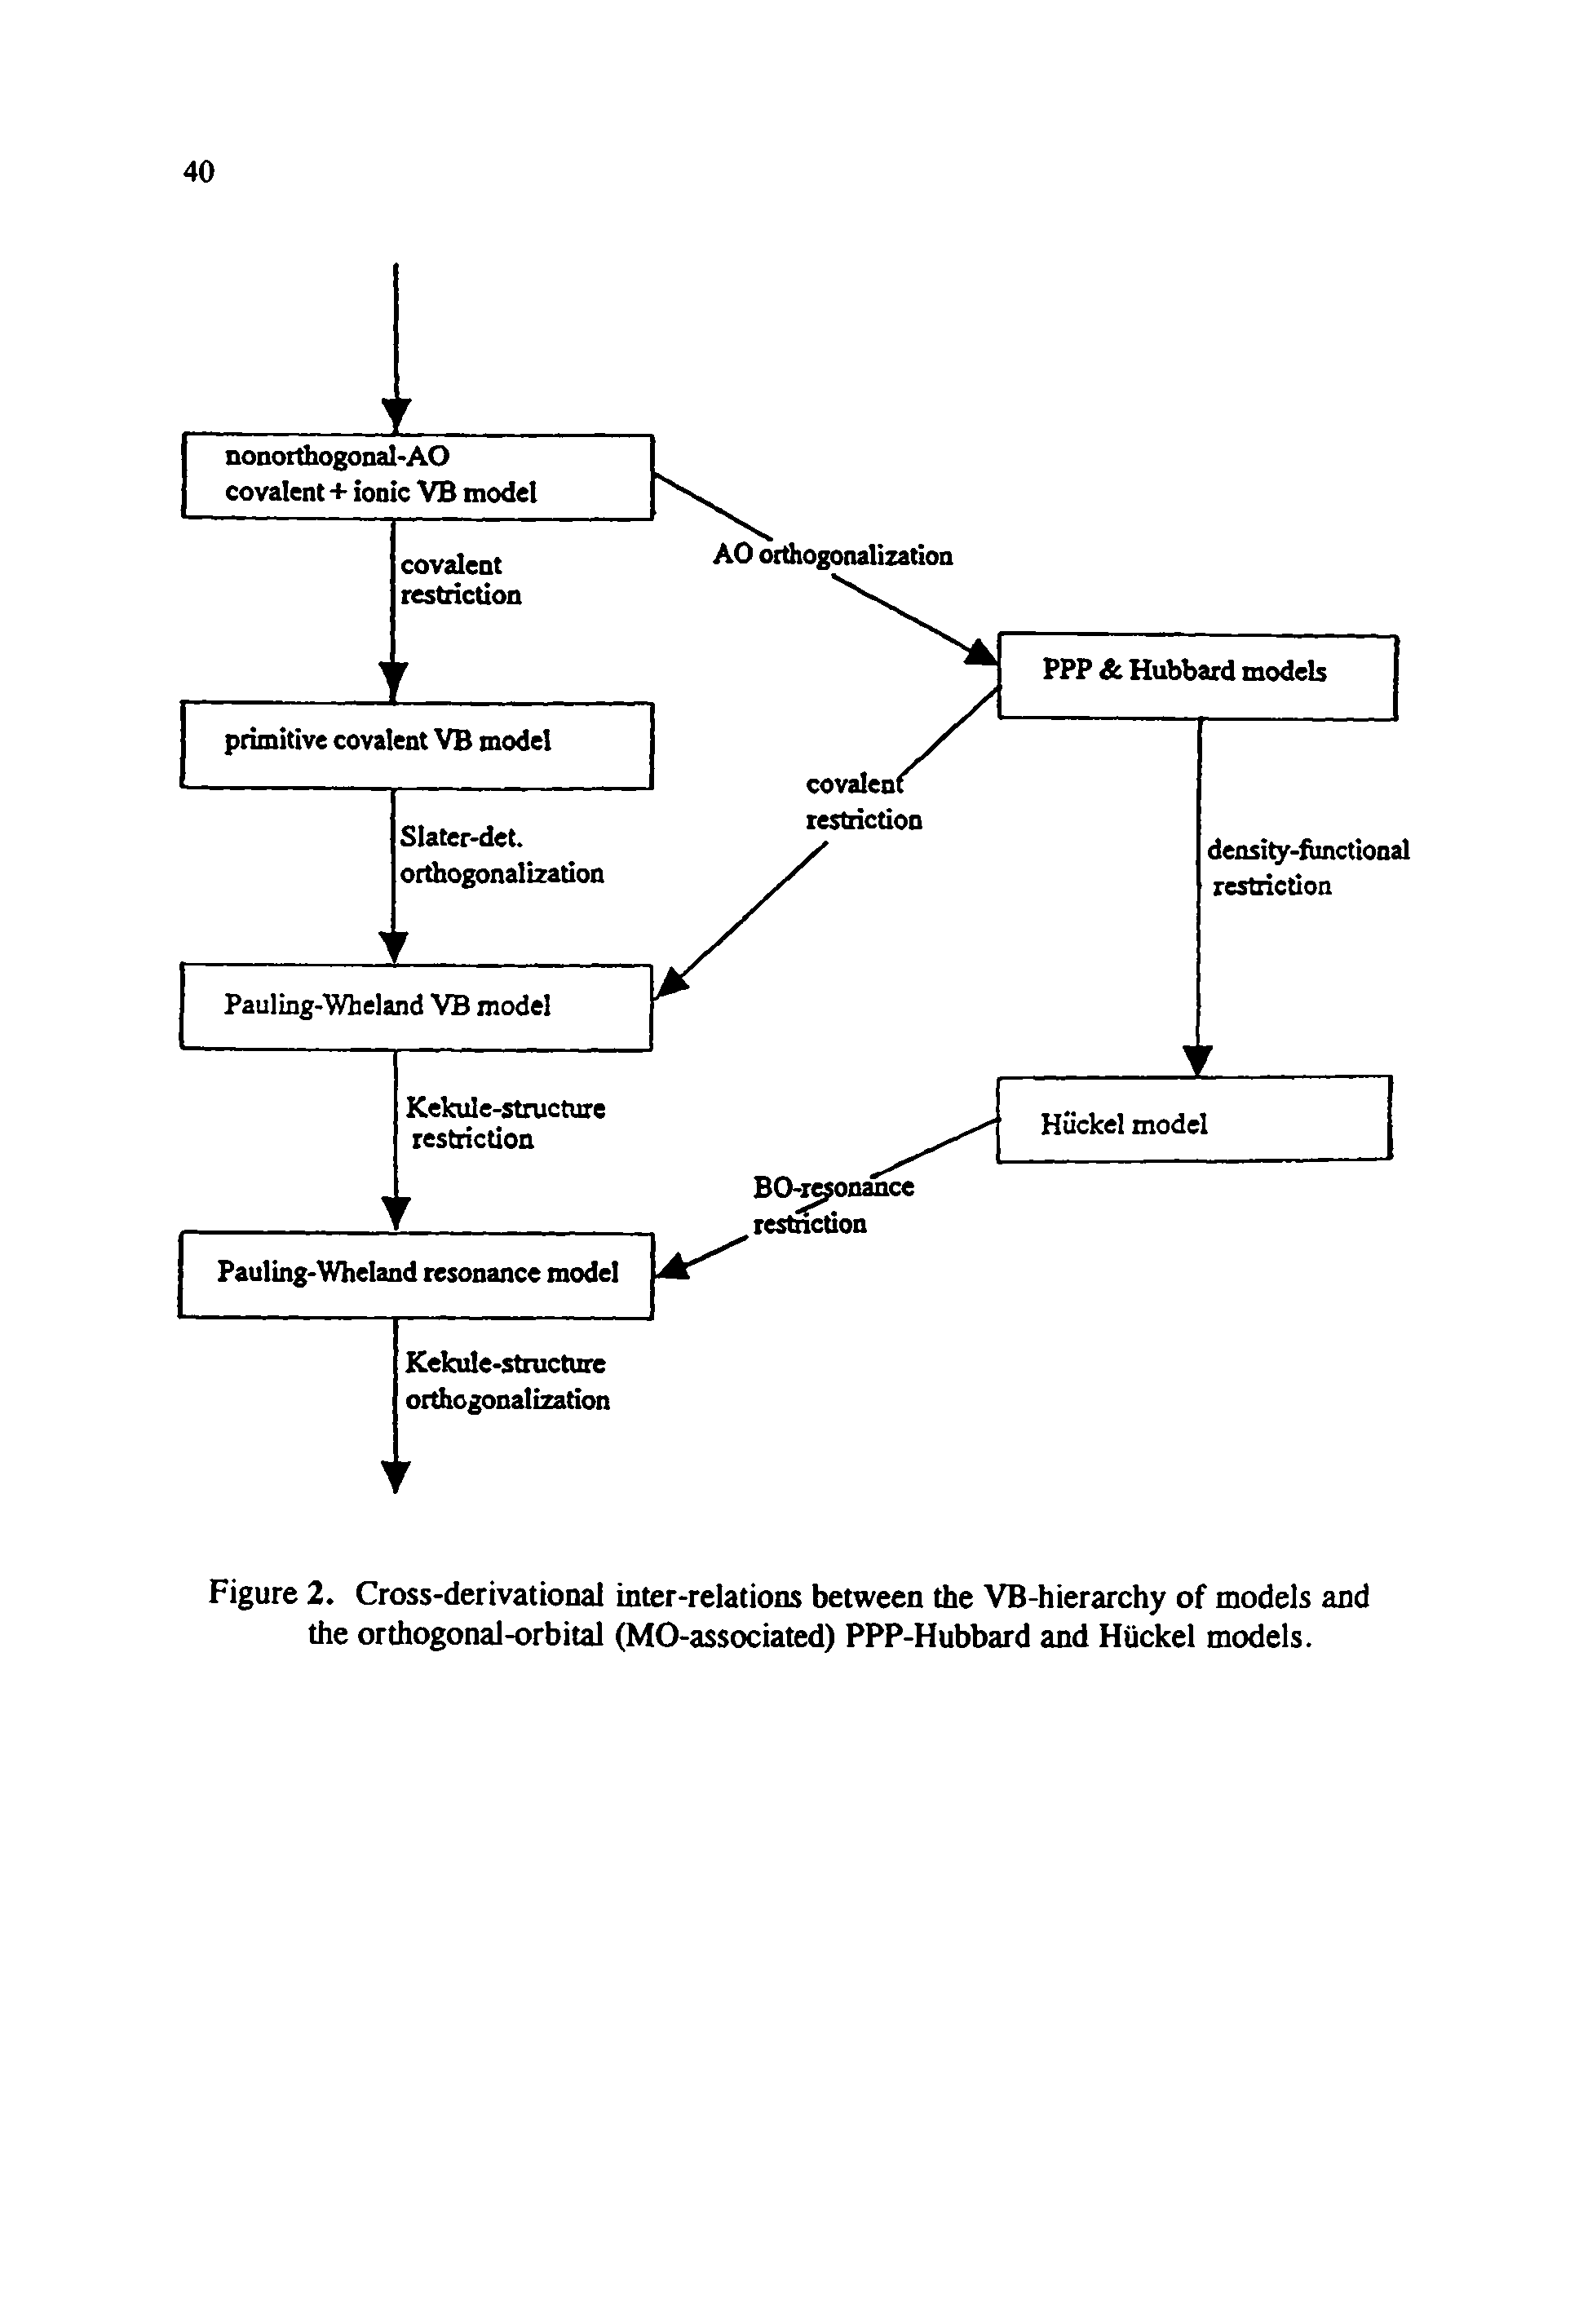 Figure 2. Cross-derivational inter-relations between the VB-hierarchy of models and the orthogonal-orbital (MO-associated) PPP-Hubbard and Hiickel models.